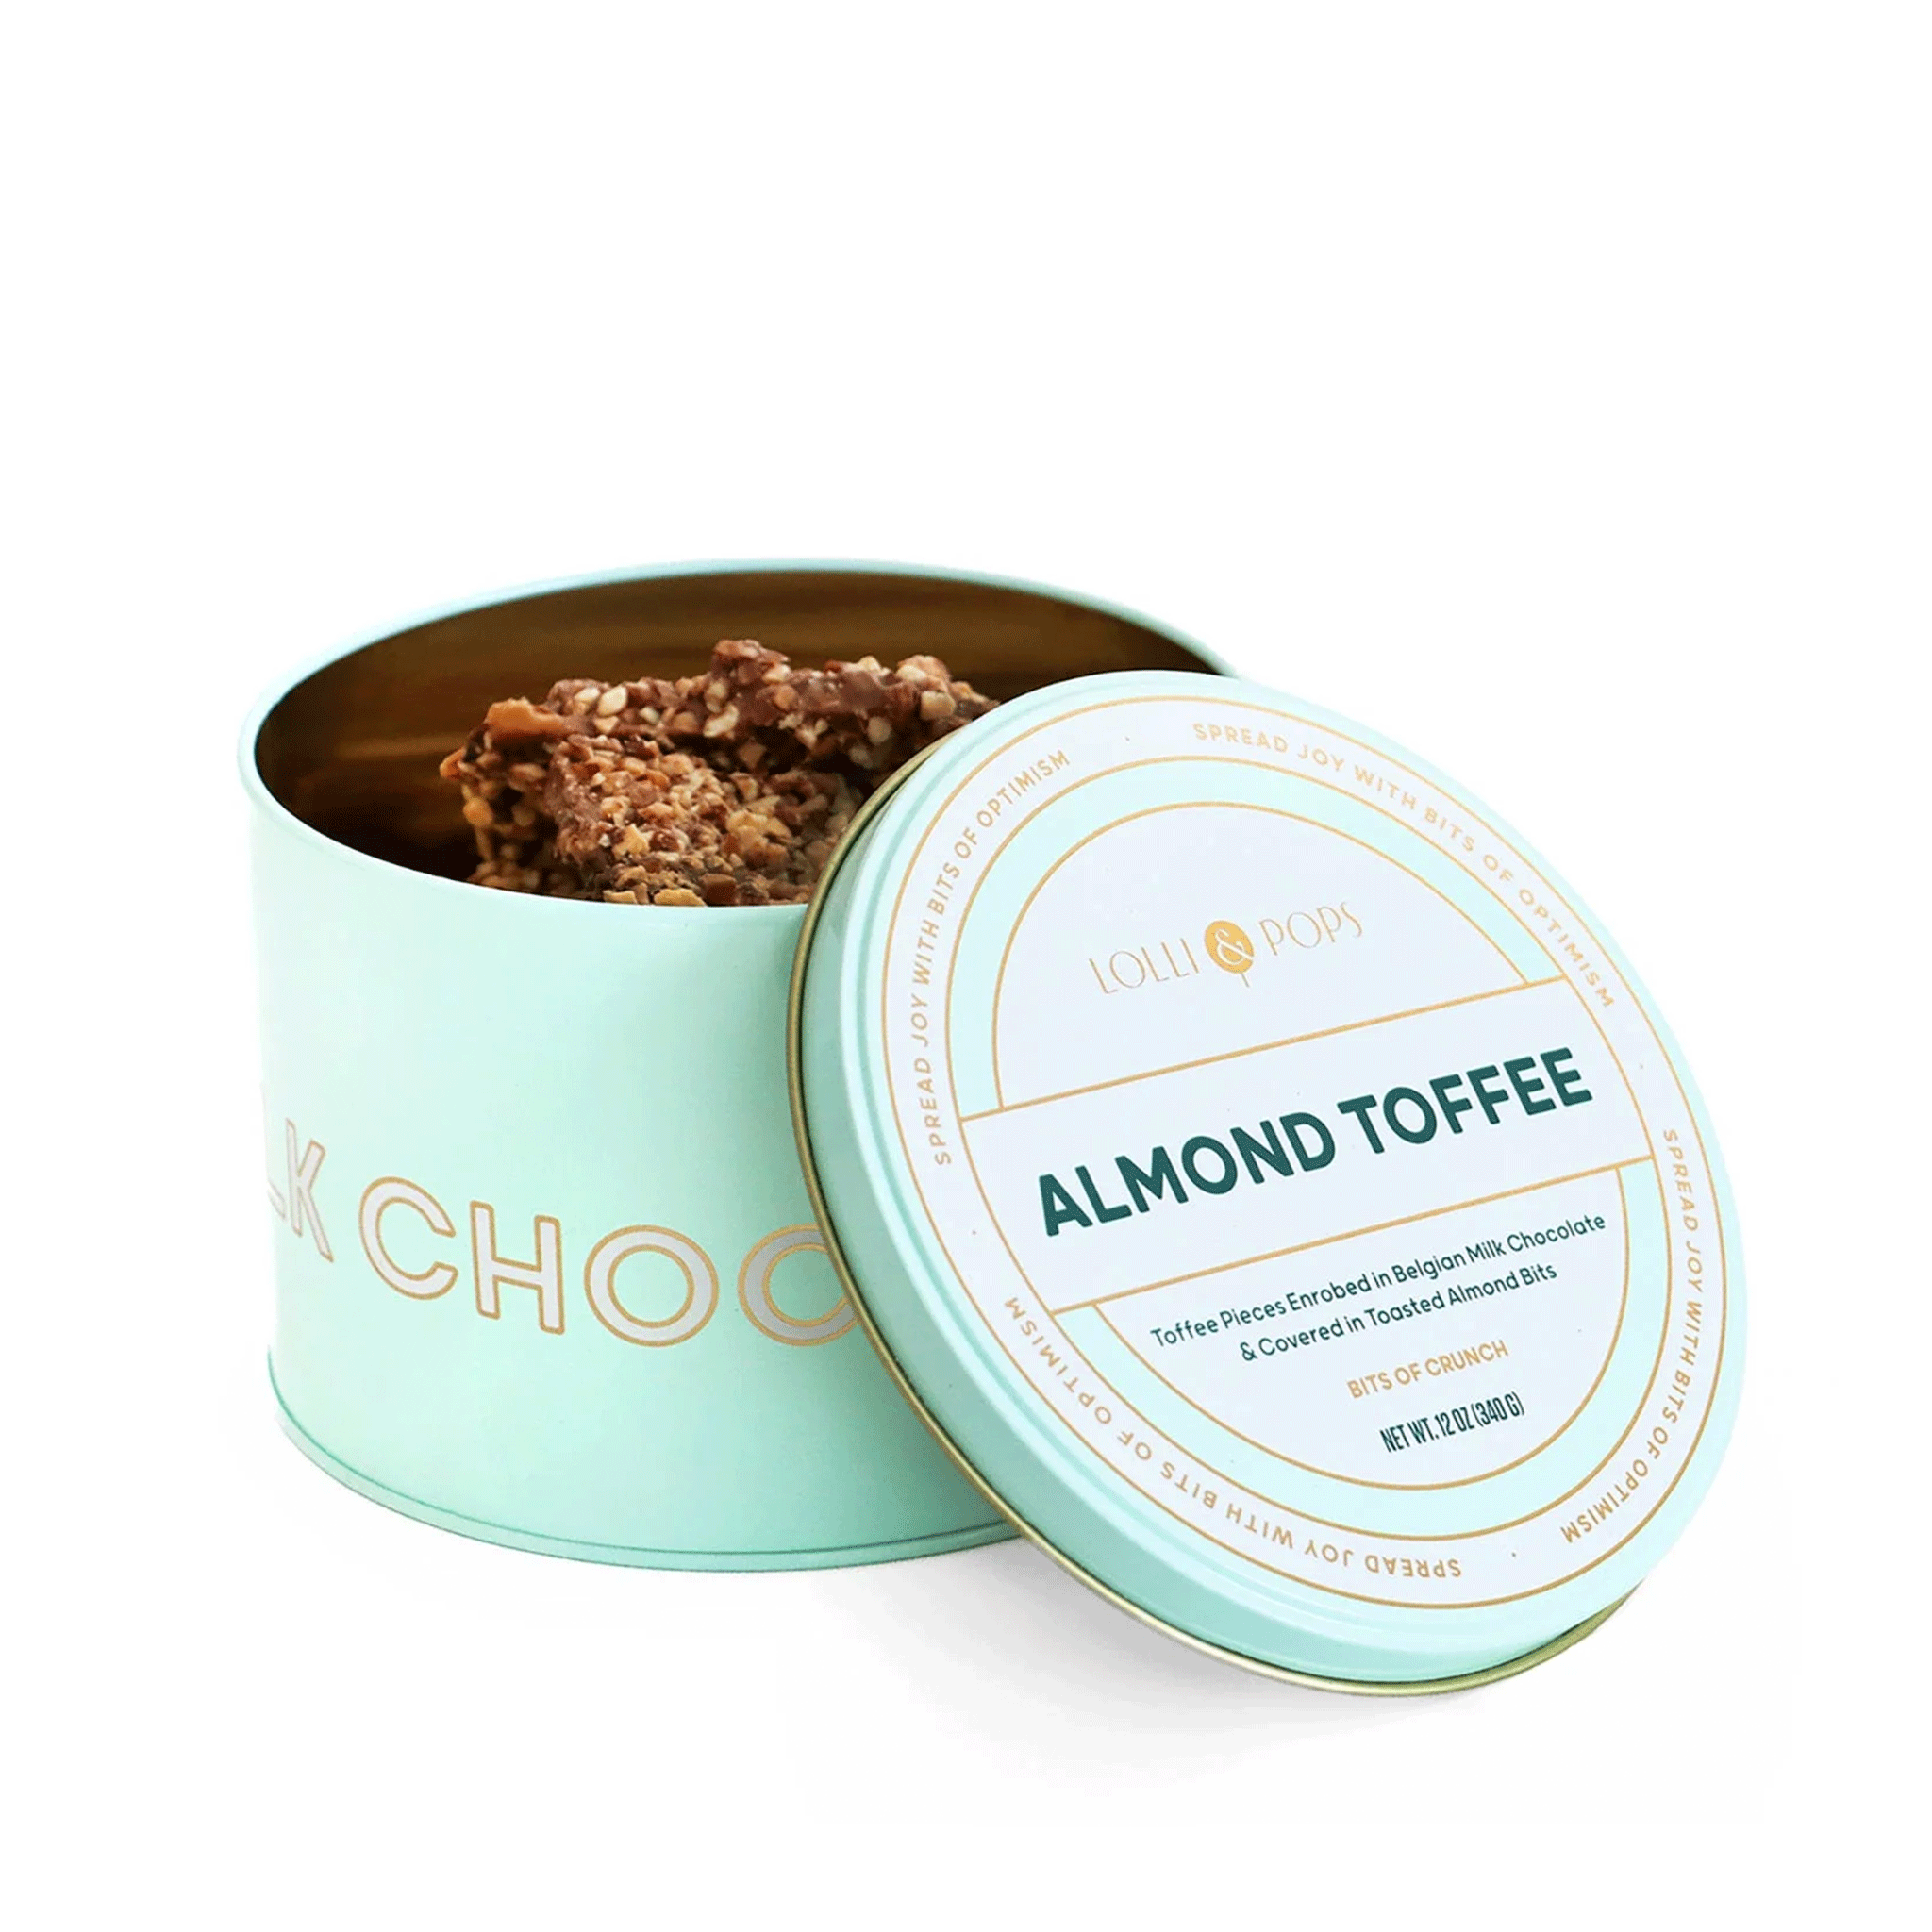 On a white background is a aqua blue tin filled with almond toffee. 